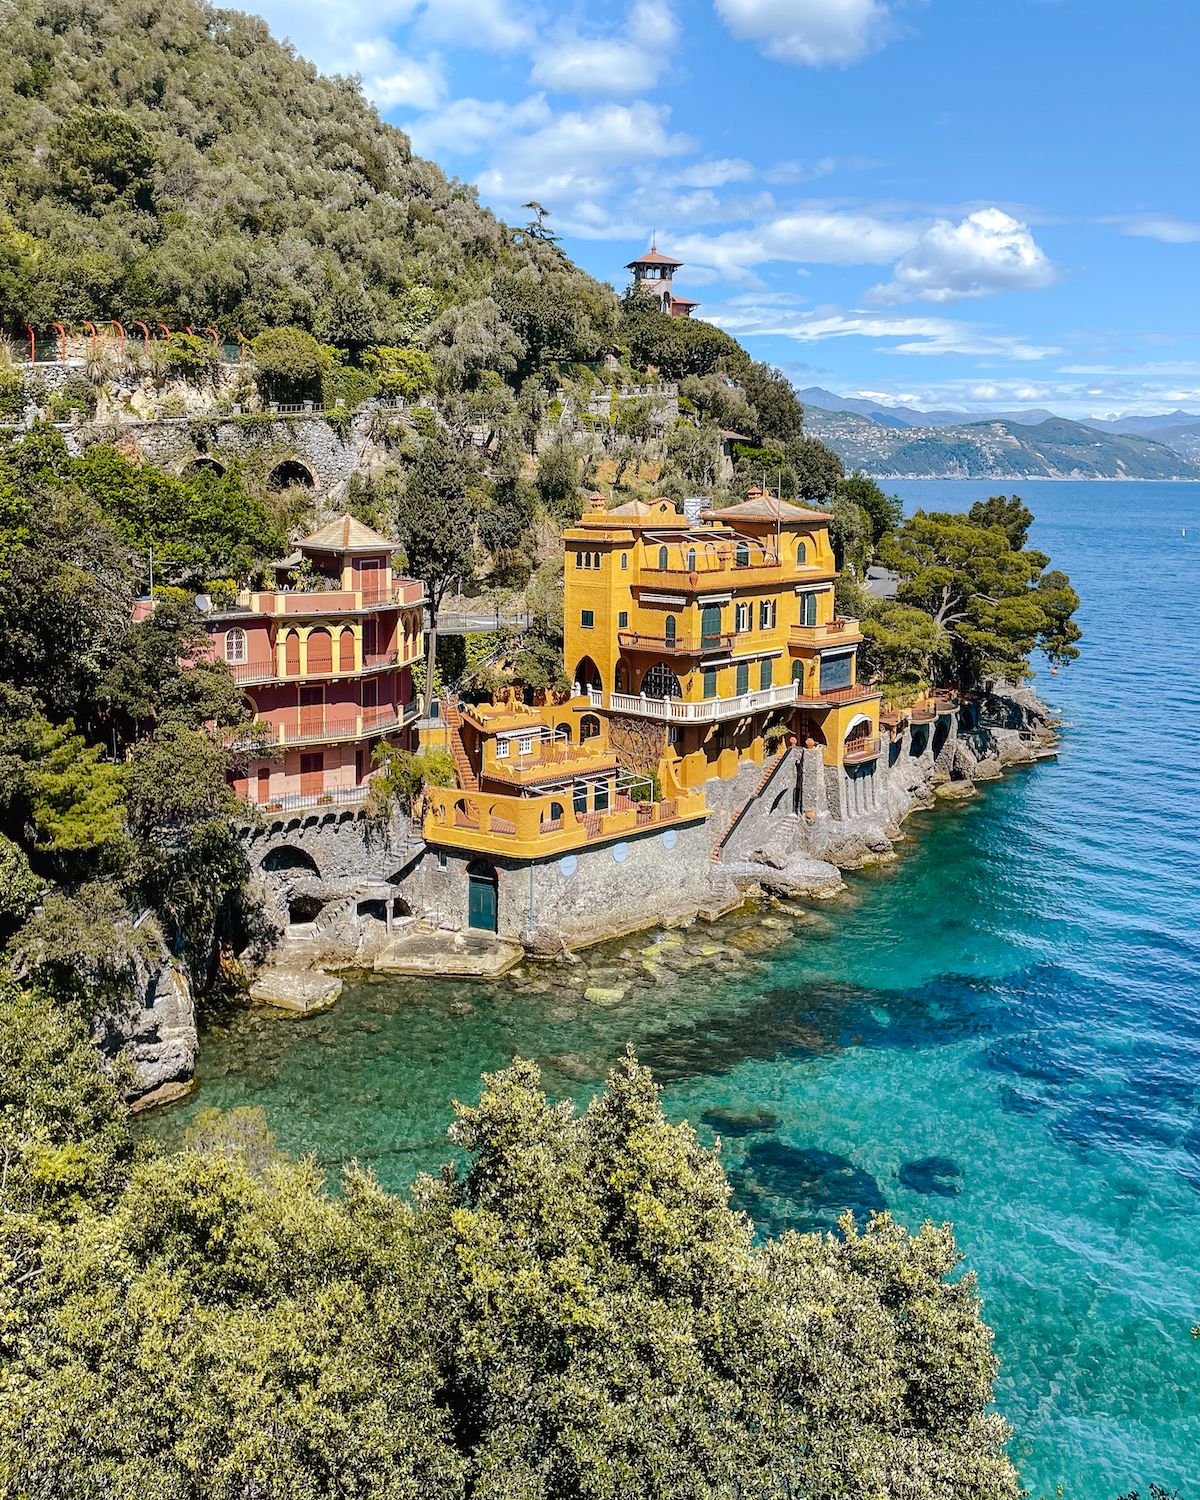 Pastel pink and yellow coloured buildings perched over a turquoise cove near Portofino